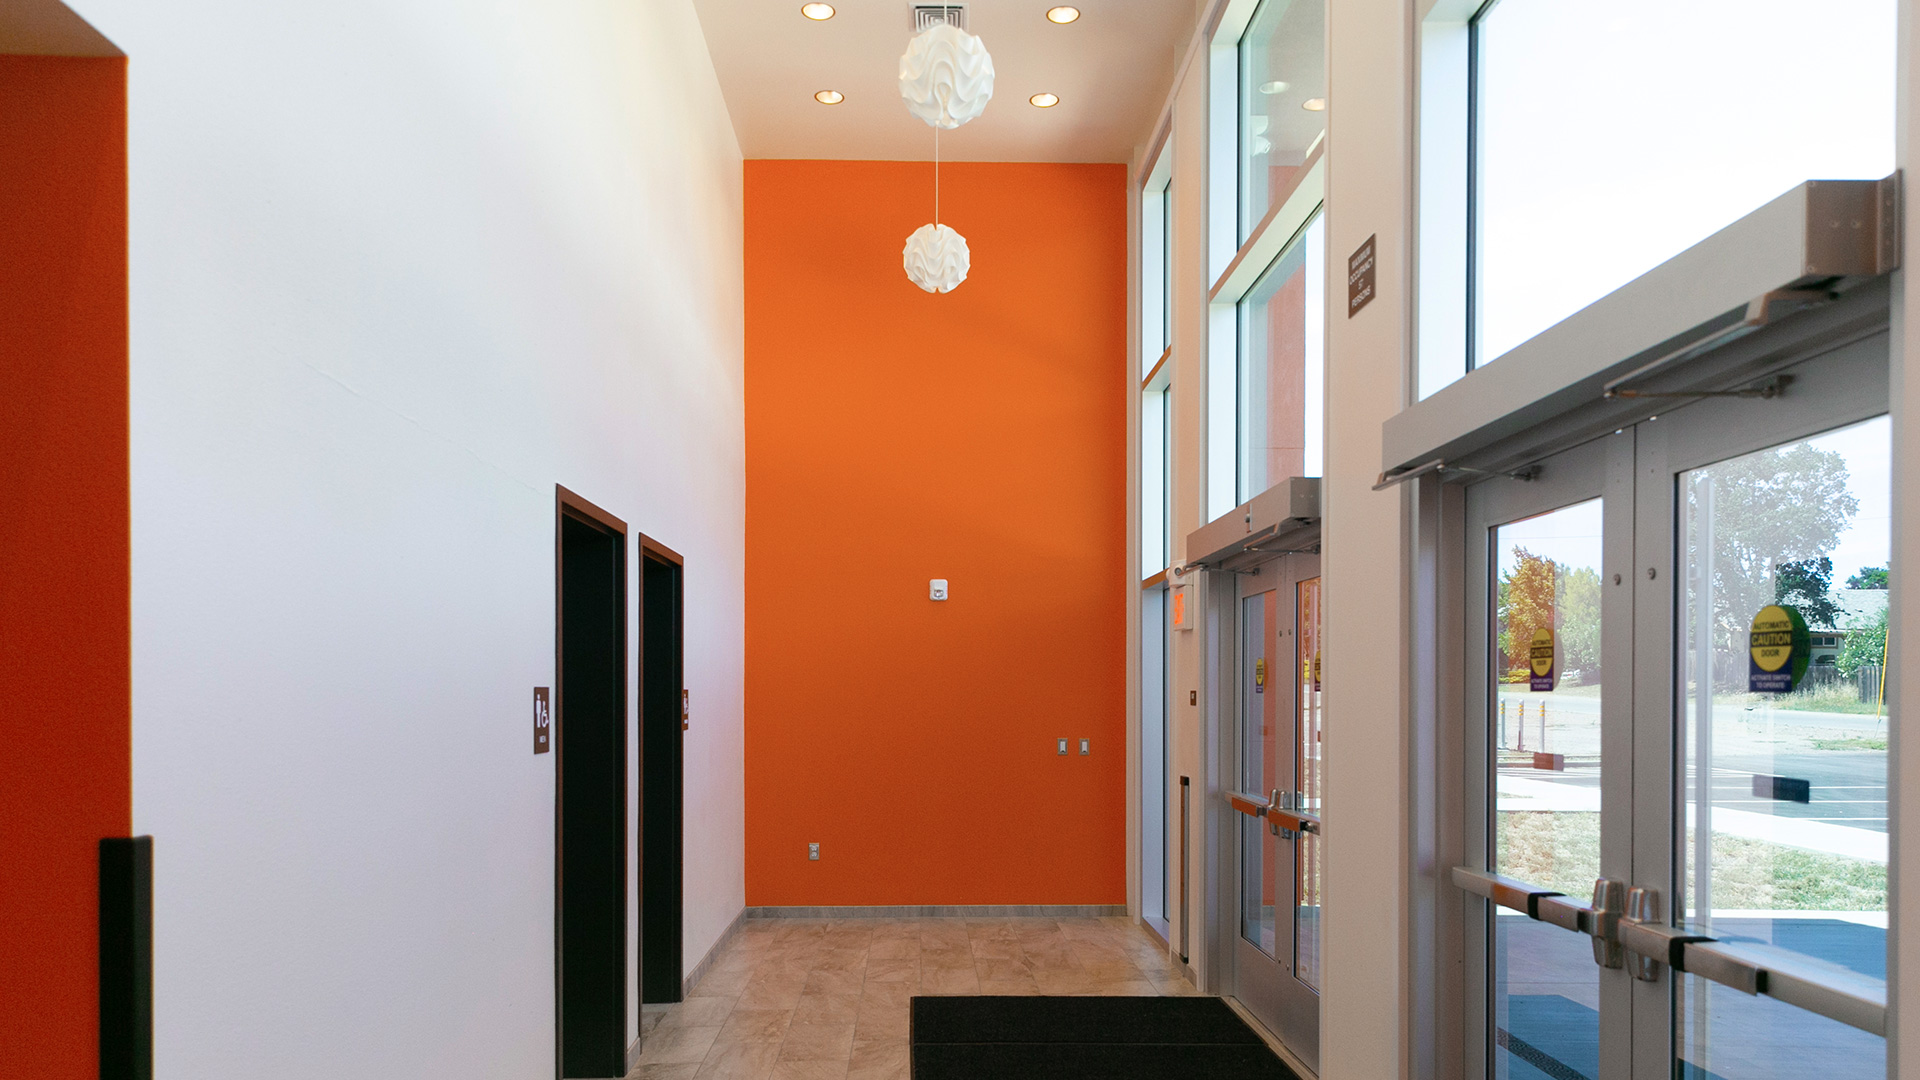 Interior of foyer with white wall and orange accent wall. Tall glass windows doors opposite bathroom entrances.